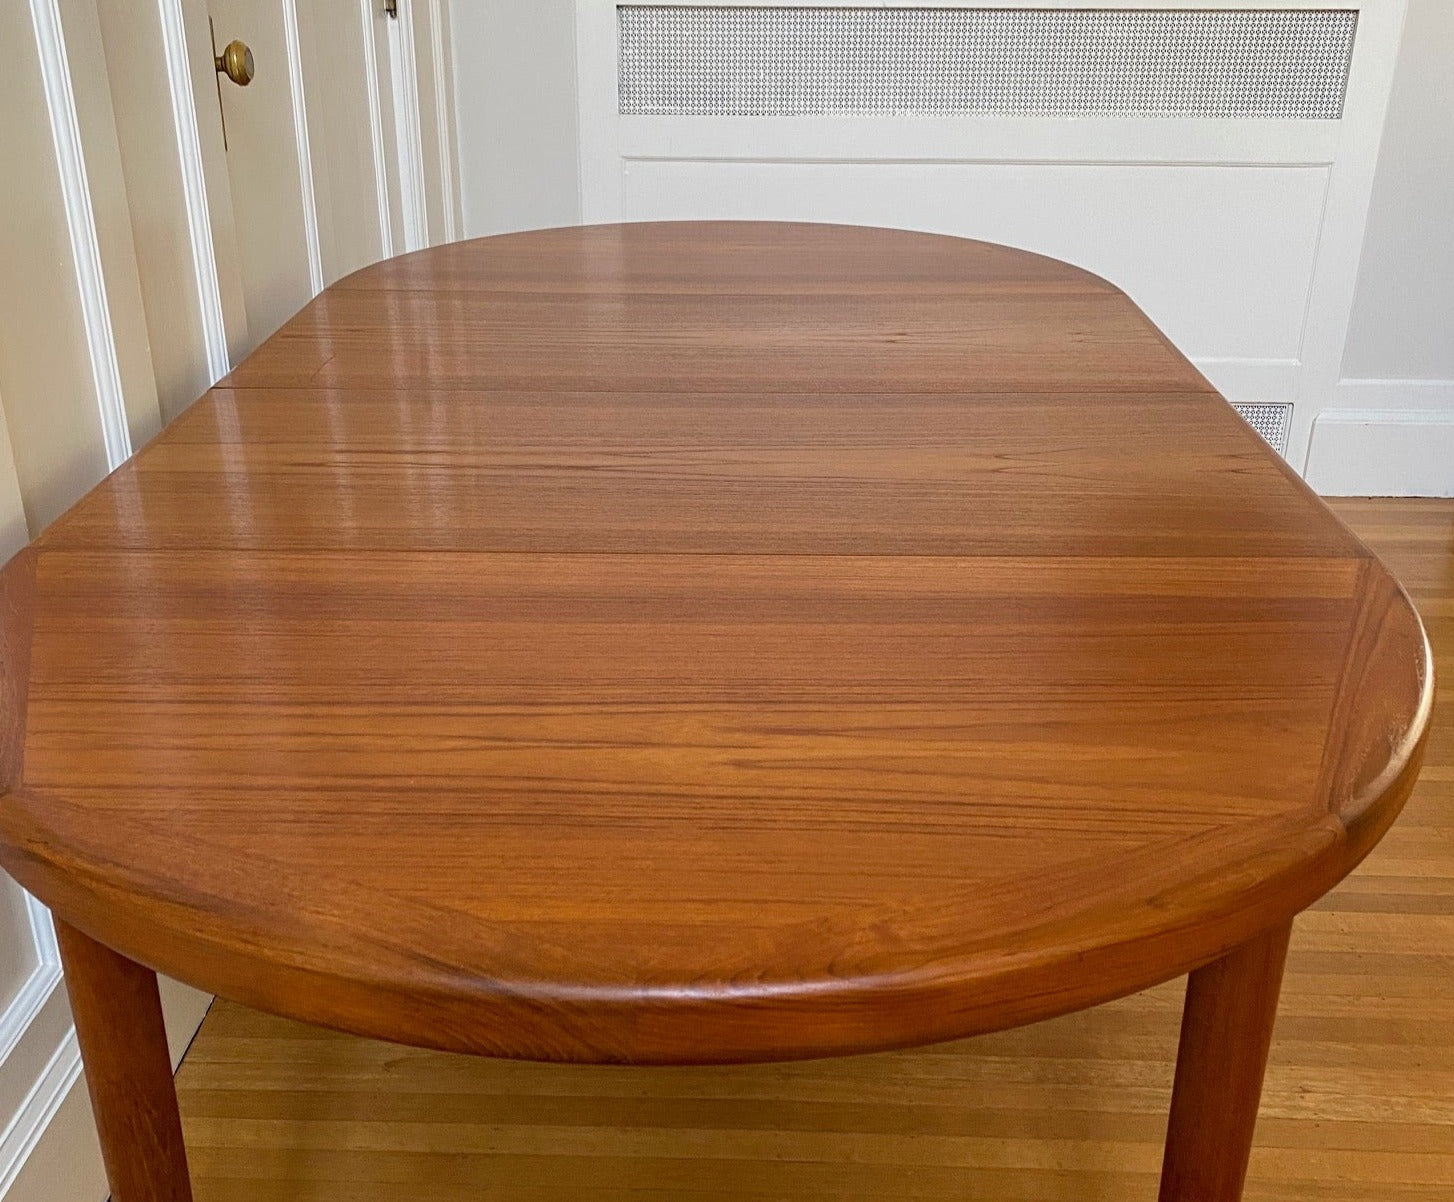 Grain wiht two leaves in. Gorgeous Mid-century honey teak round dining table. Smaller profile than our other round dining tables, this beauty has an elegant staved edge of solid teak- Cook Street Vintage